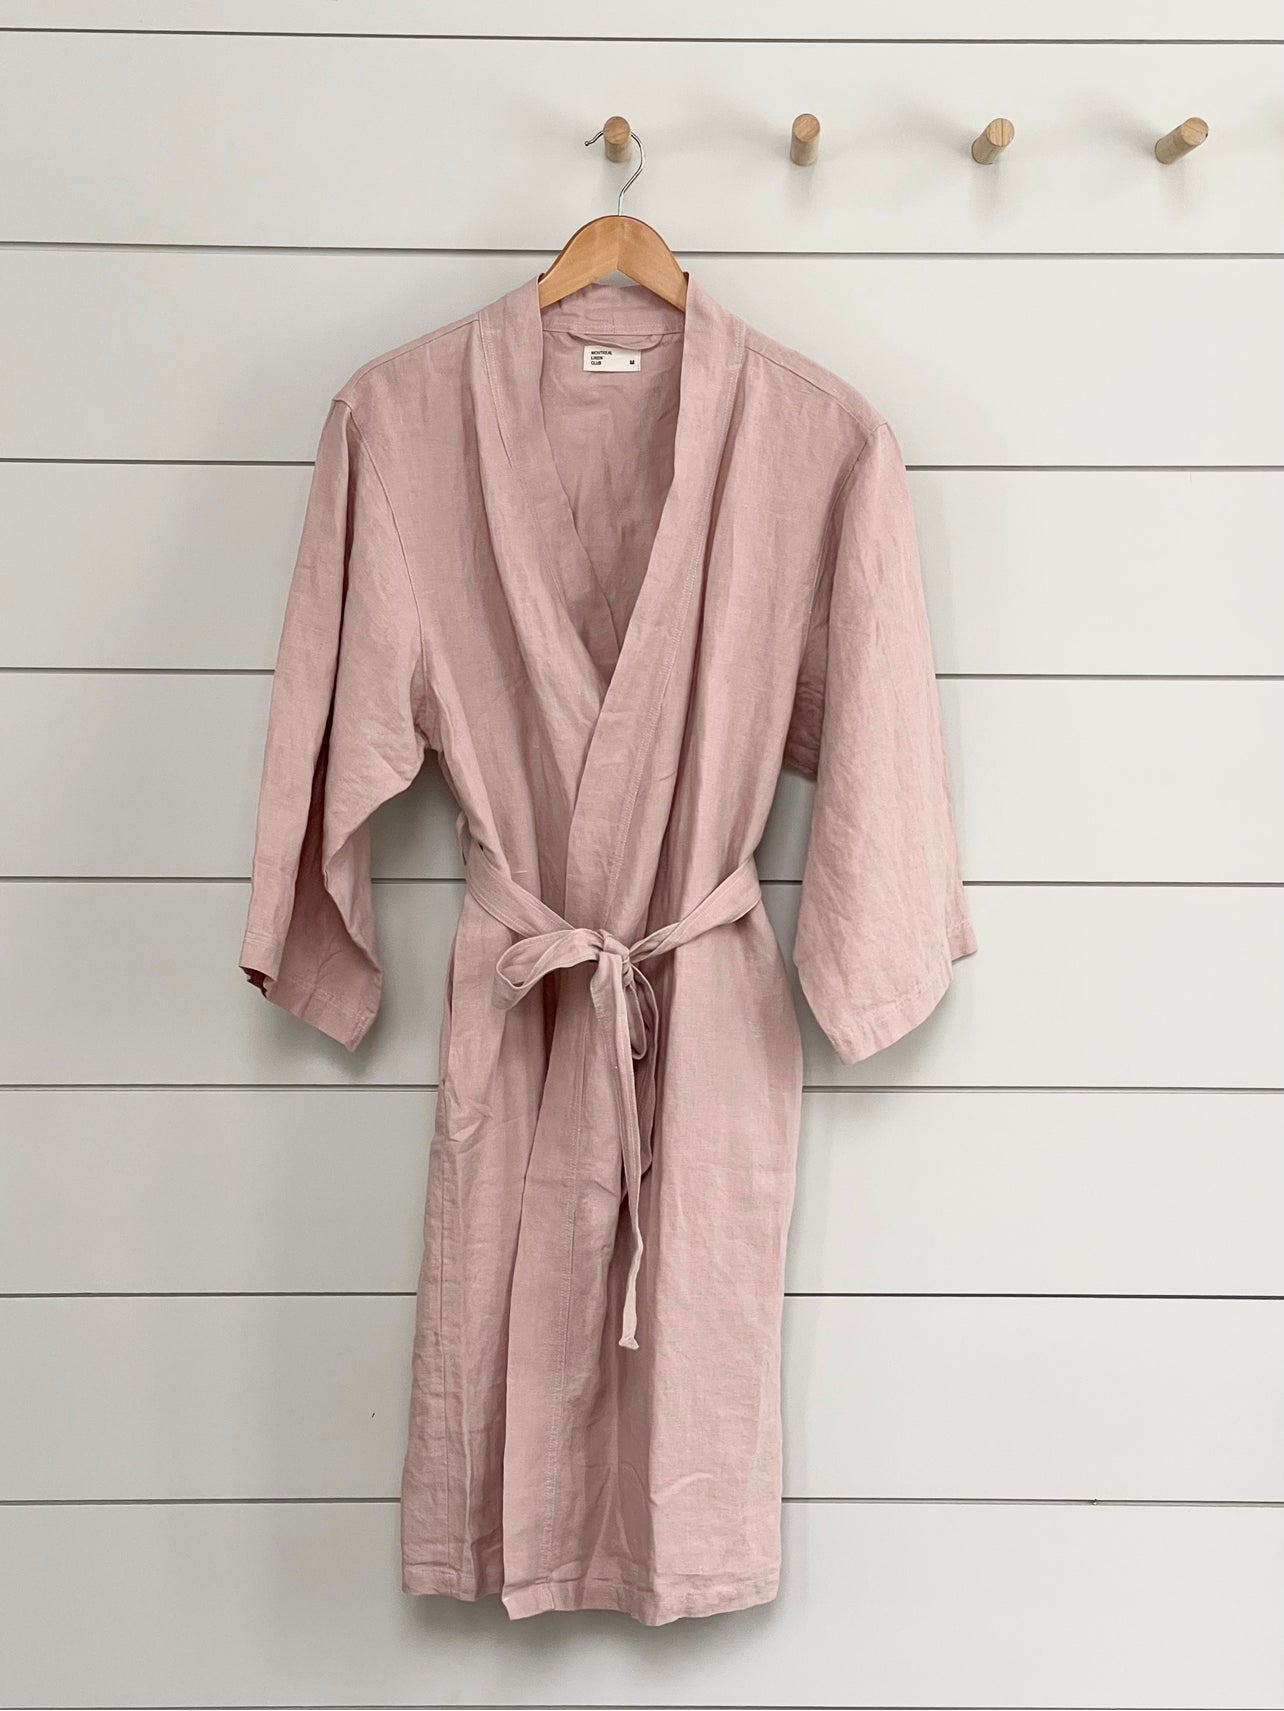 STONEWASH 100% FRENCH FLAX LINEN CLASSIC BATHROBE women-accessories onesky Dusty Pink SMALL IN STOCK